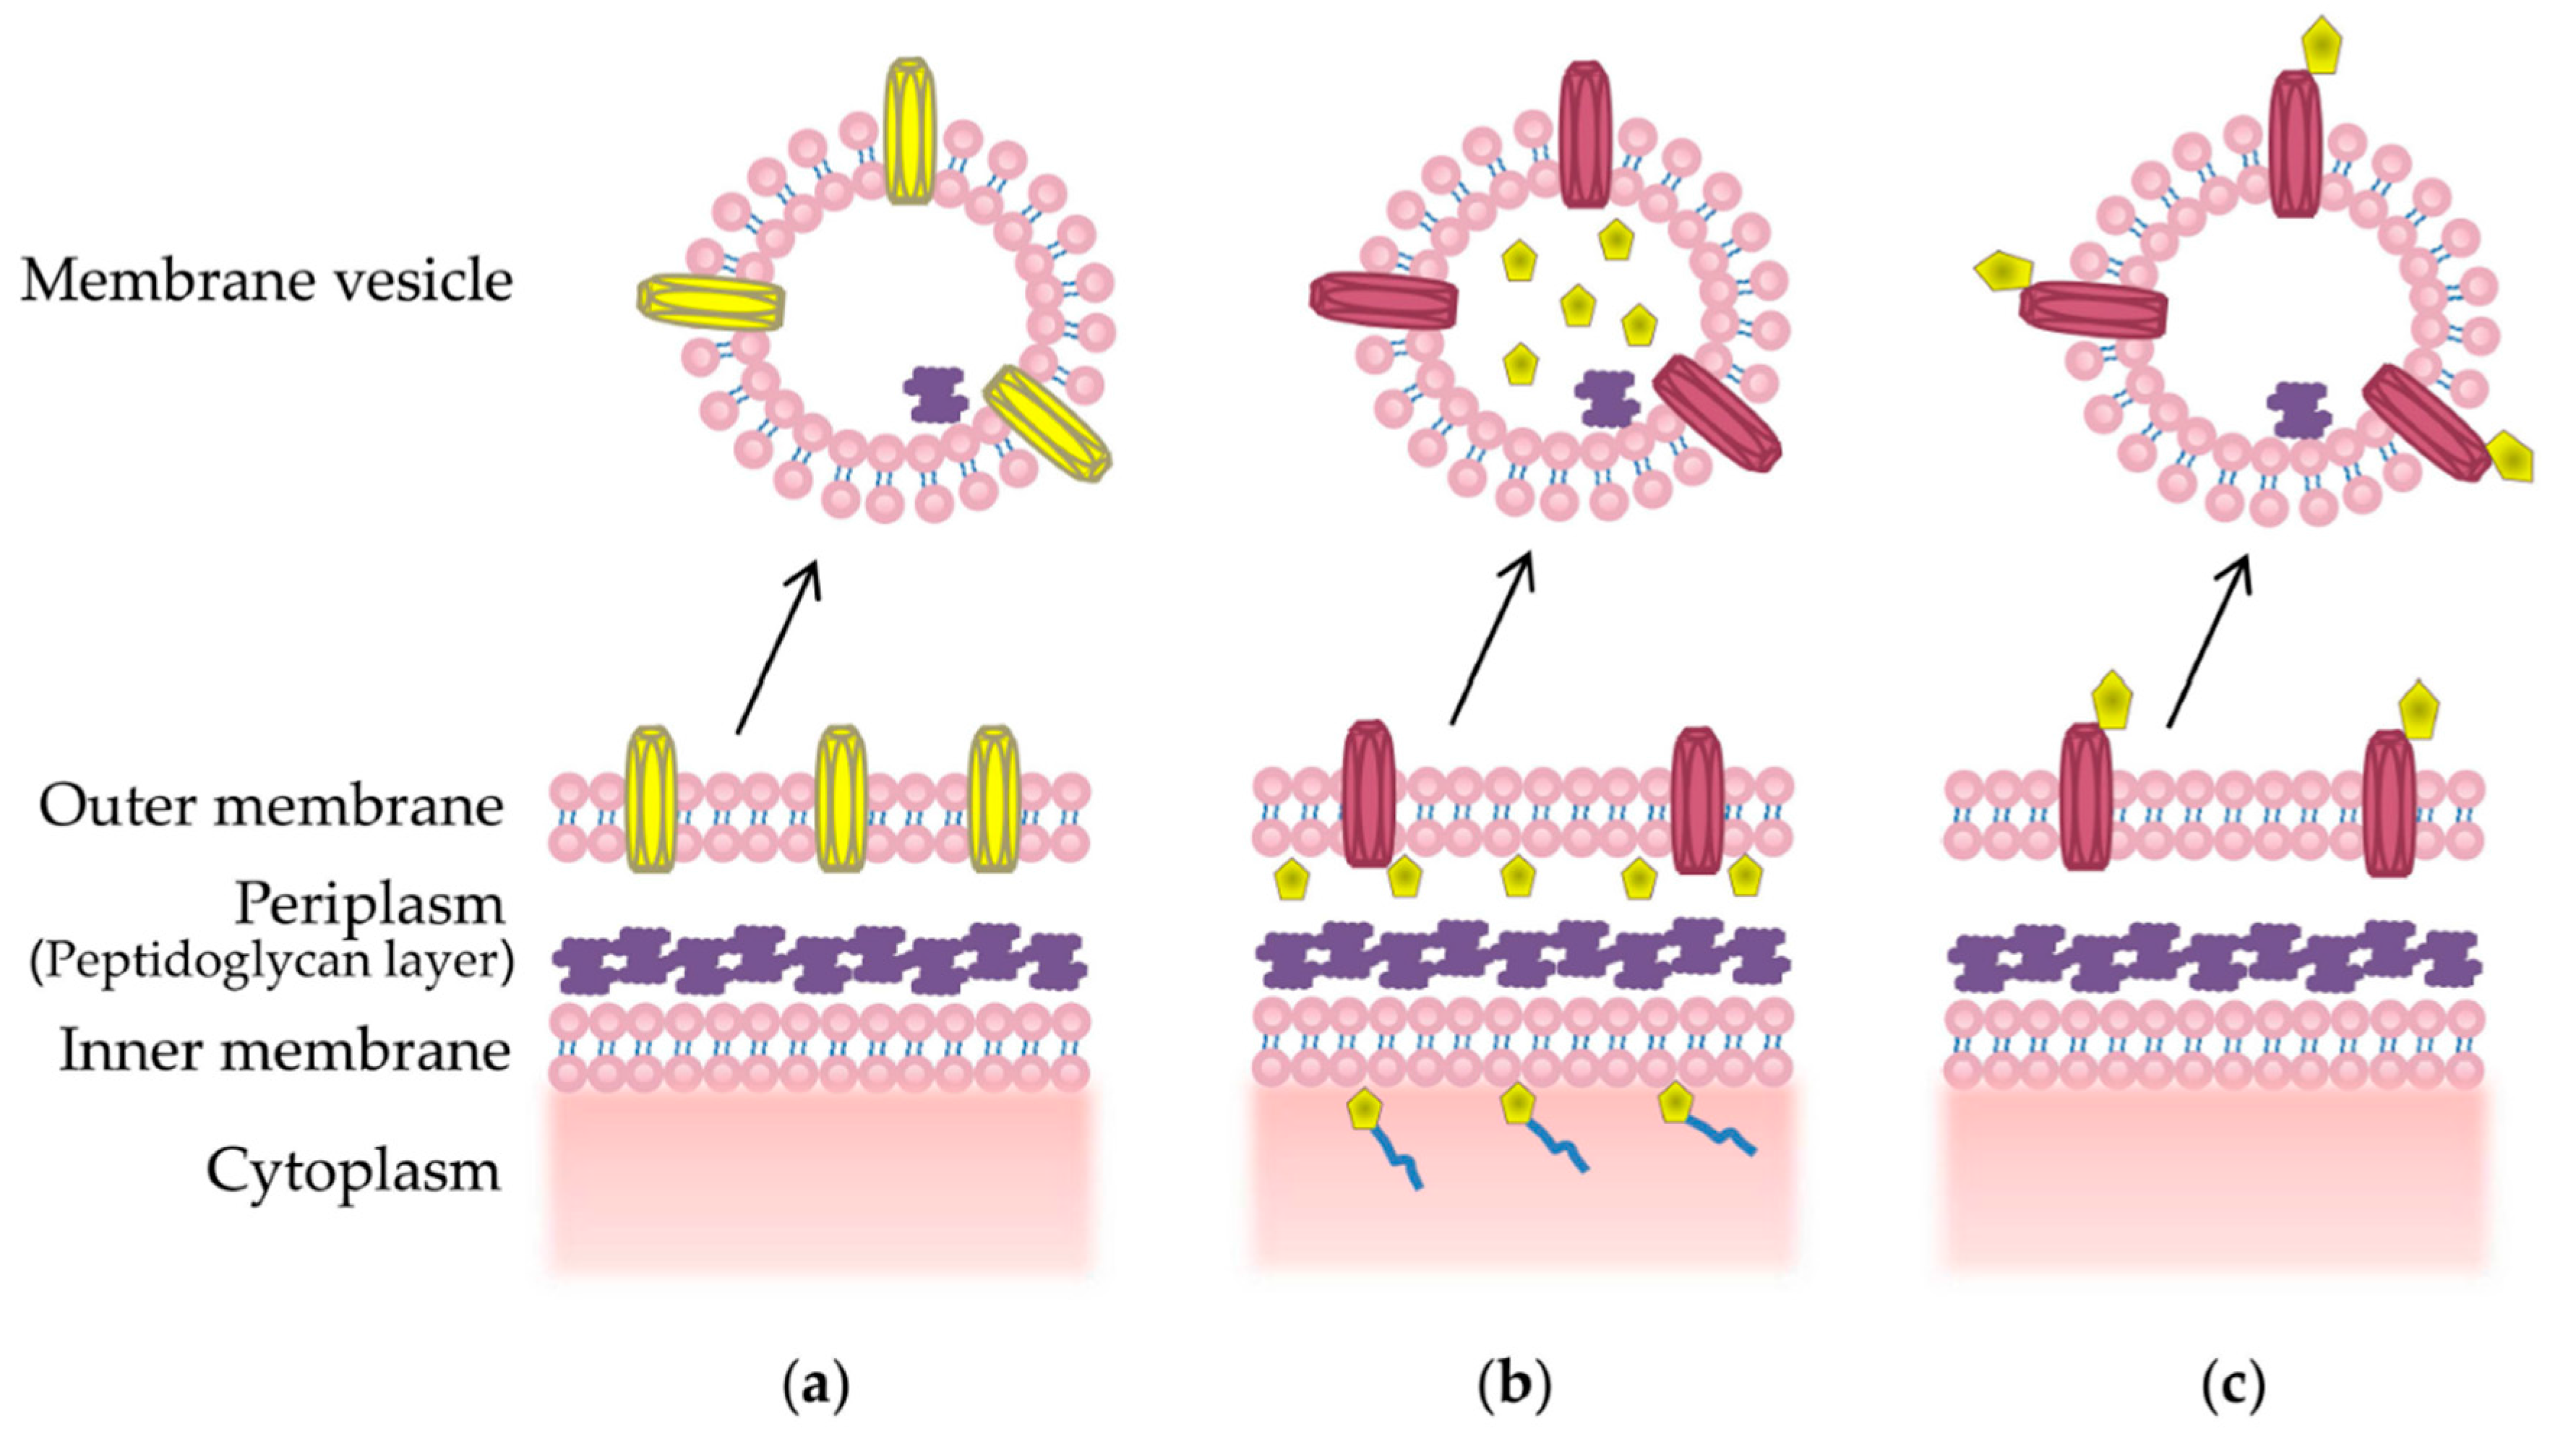 IJMS | Free Full-Text | The Therapeutic Benefit of Bacterial Membrane